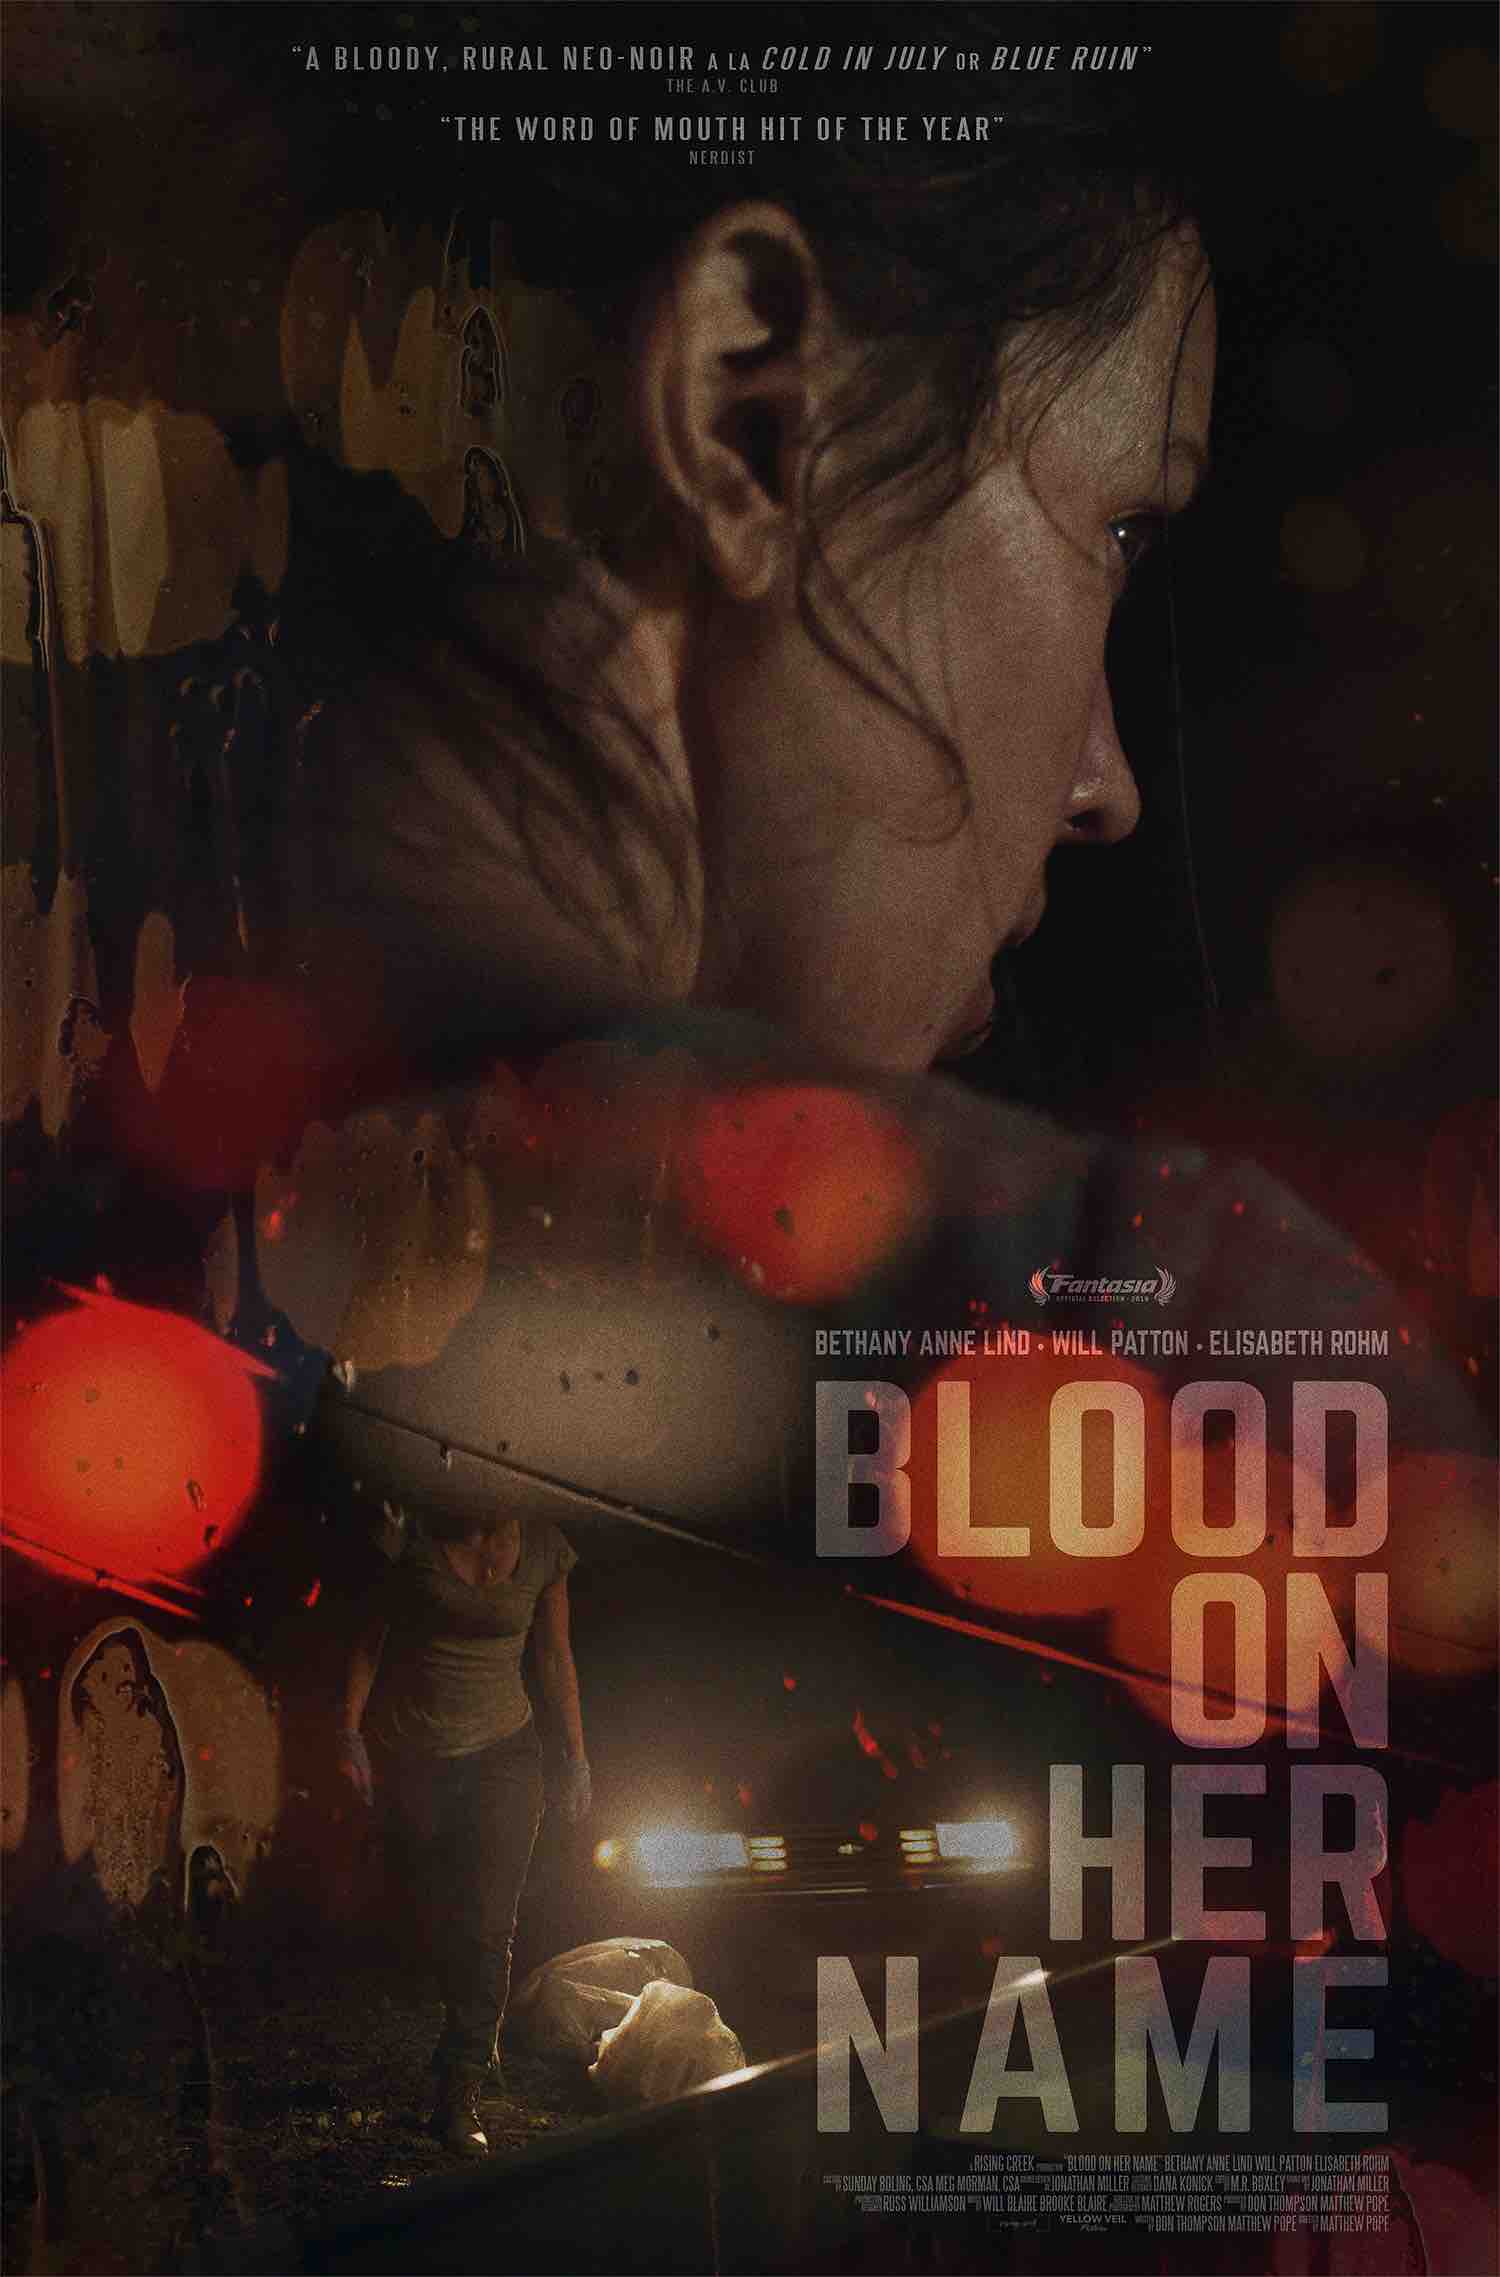 [News] Check Out The Brand New BLOOD ON HER NAME Trailer